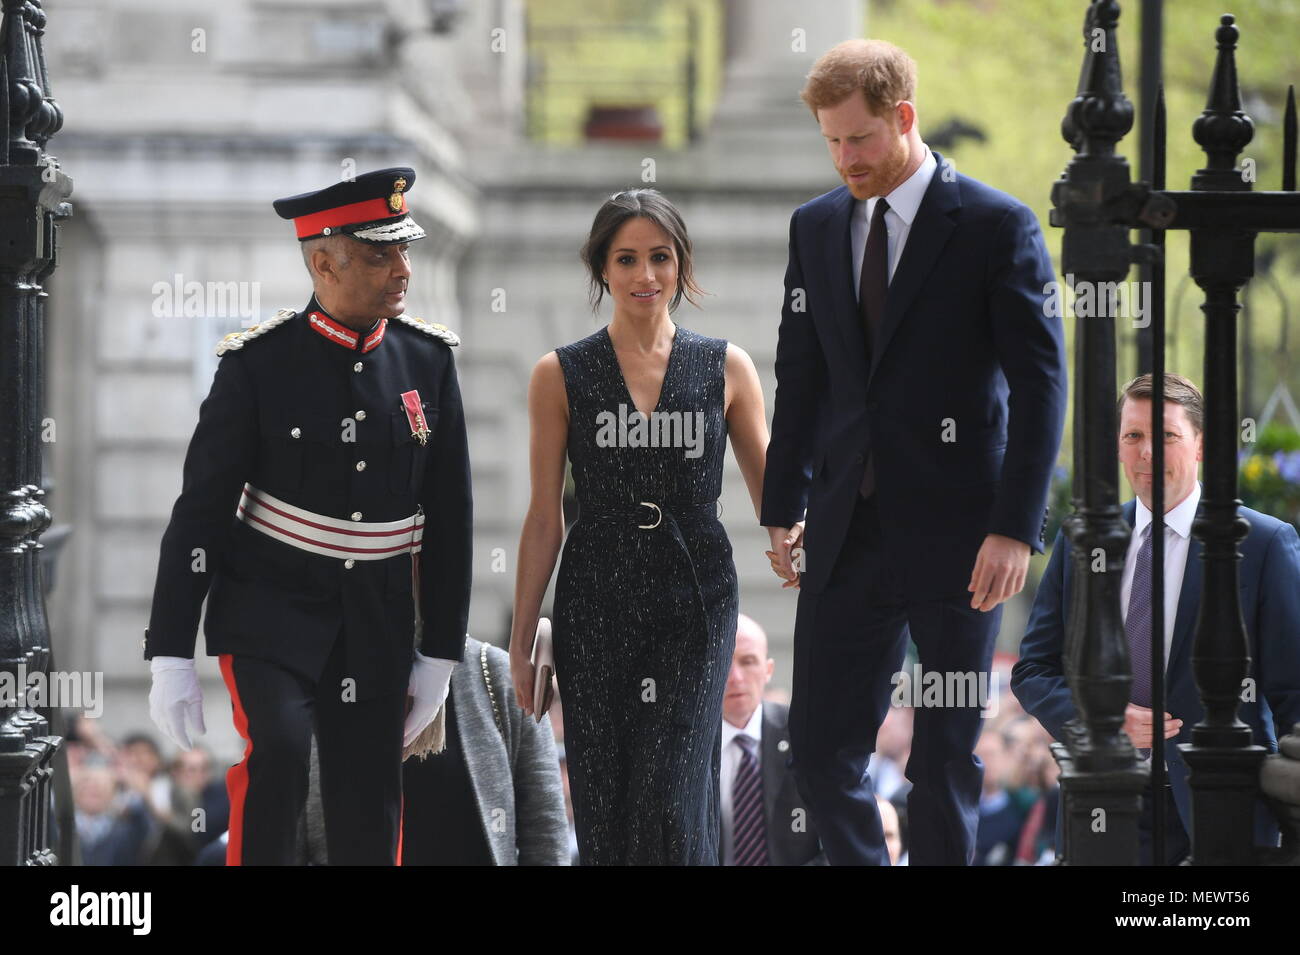 Prince Harry and Meghan Markle arrive at a memorial service at St Martin-in-the-Fields in Trafalgar Square, London, to commemorate the 25th anniversary of the murder of Stephen Lawrence. Stock Photo